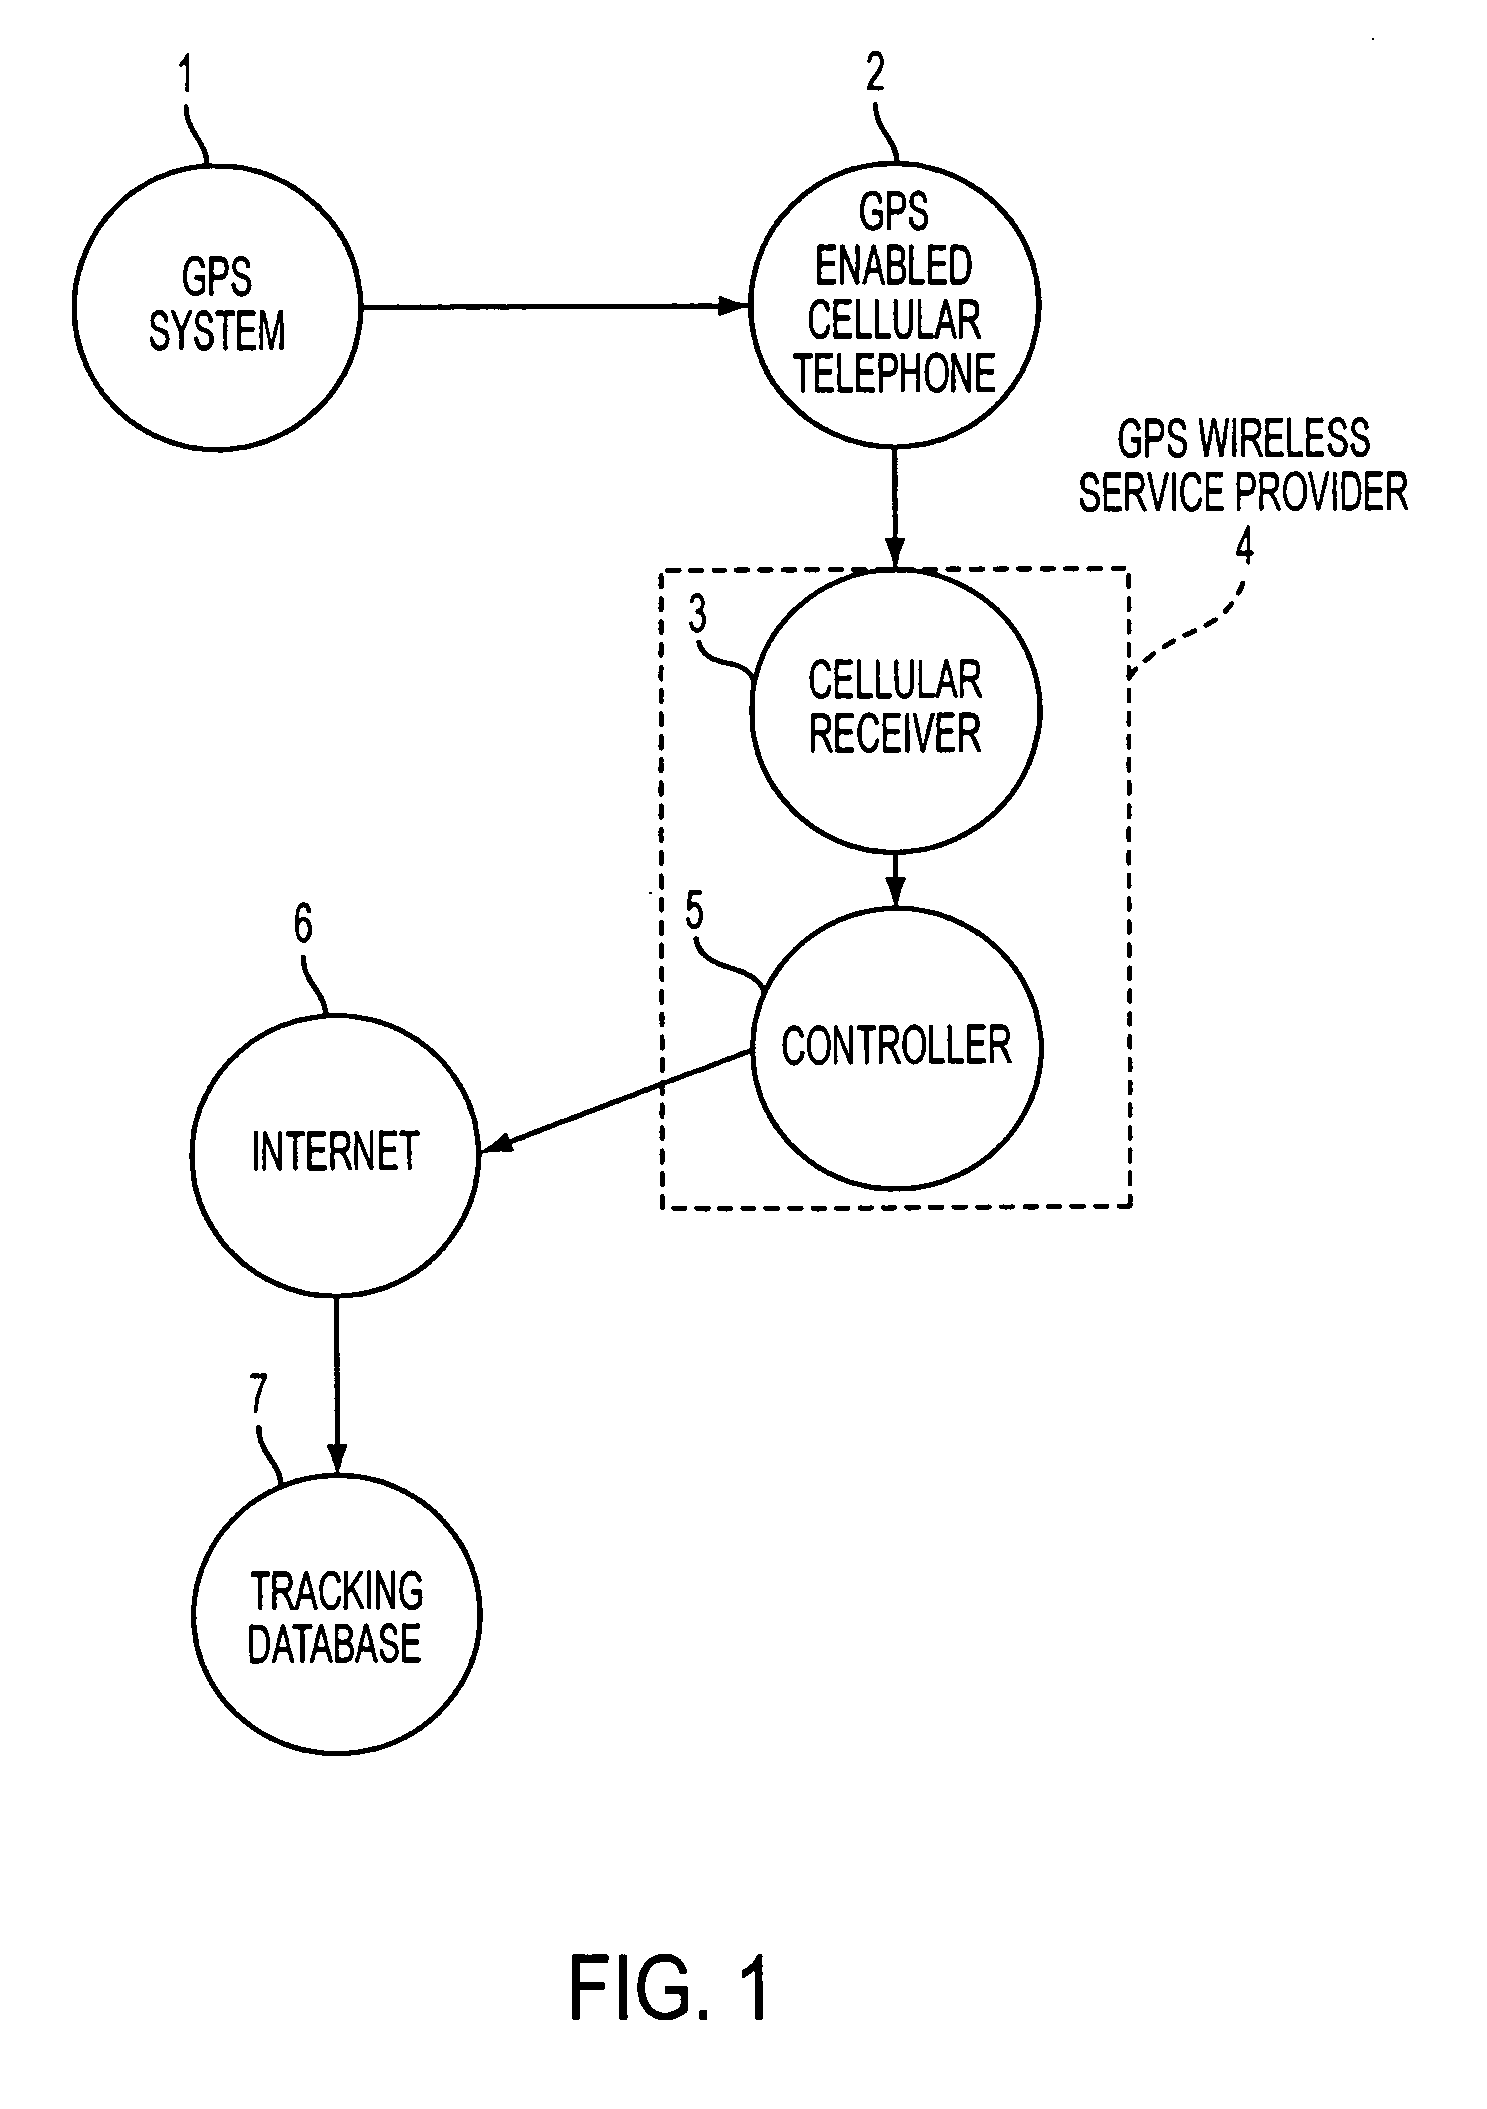 Cellular telephone based electronic access control system